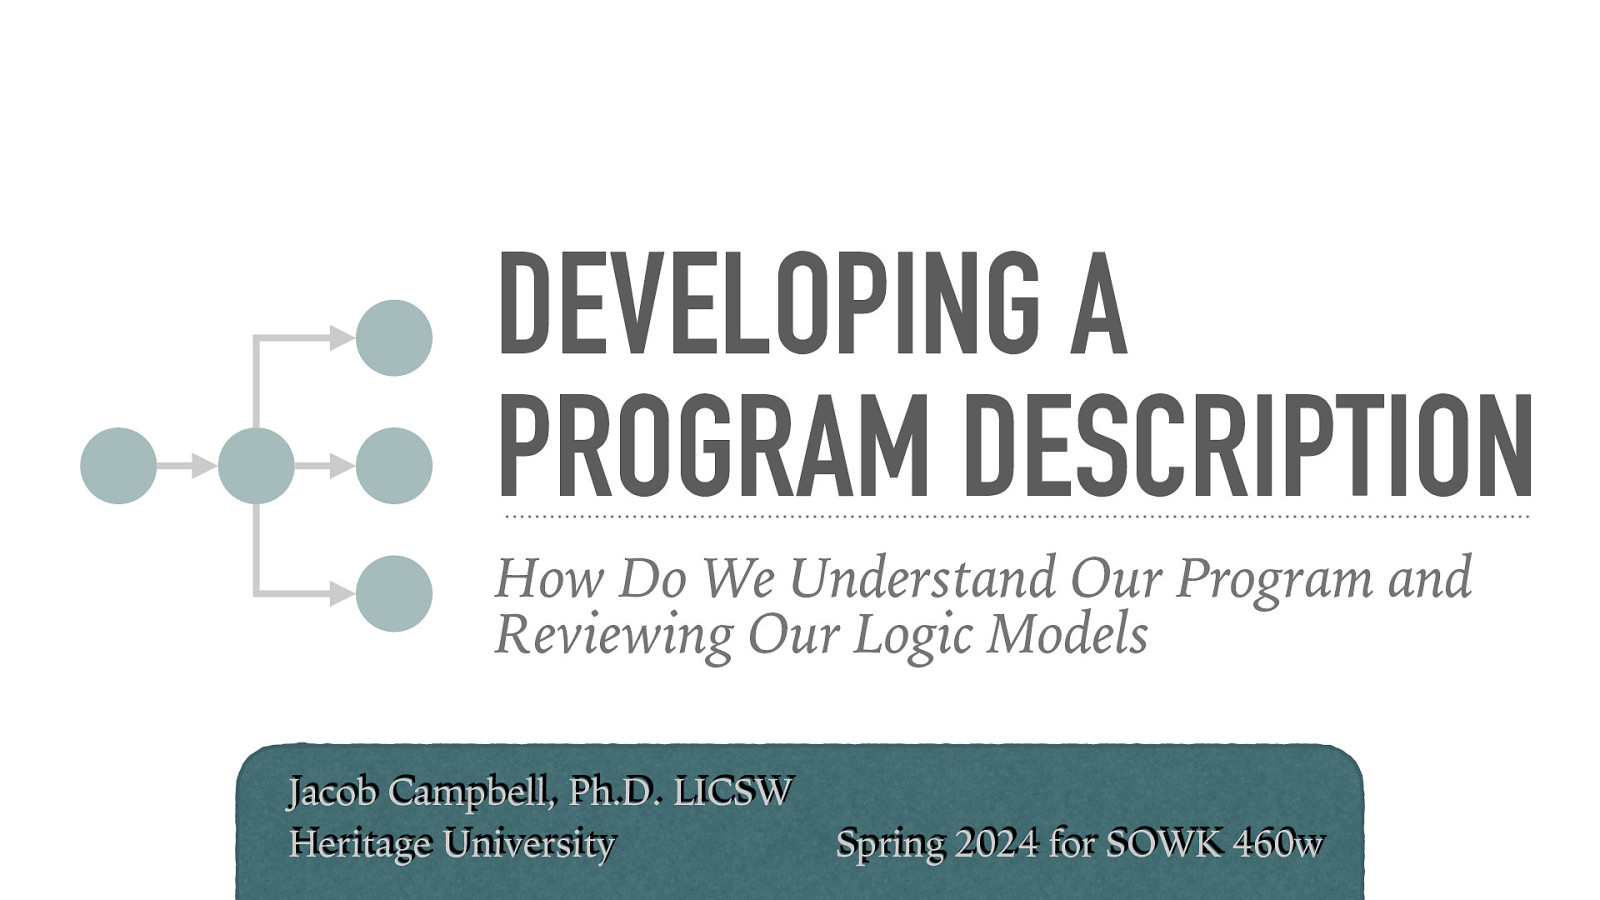 Spring 2024 SOWK 460w Week 07 - Developing a Program Description by Jacob Campbell